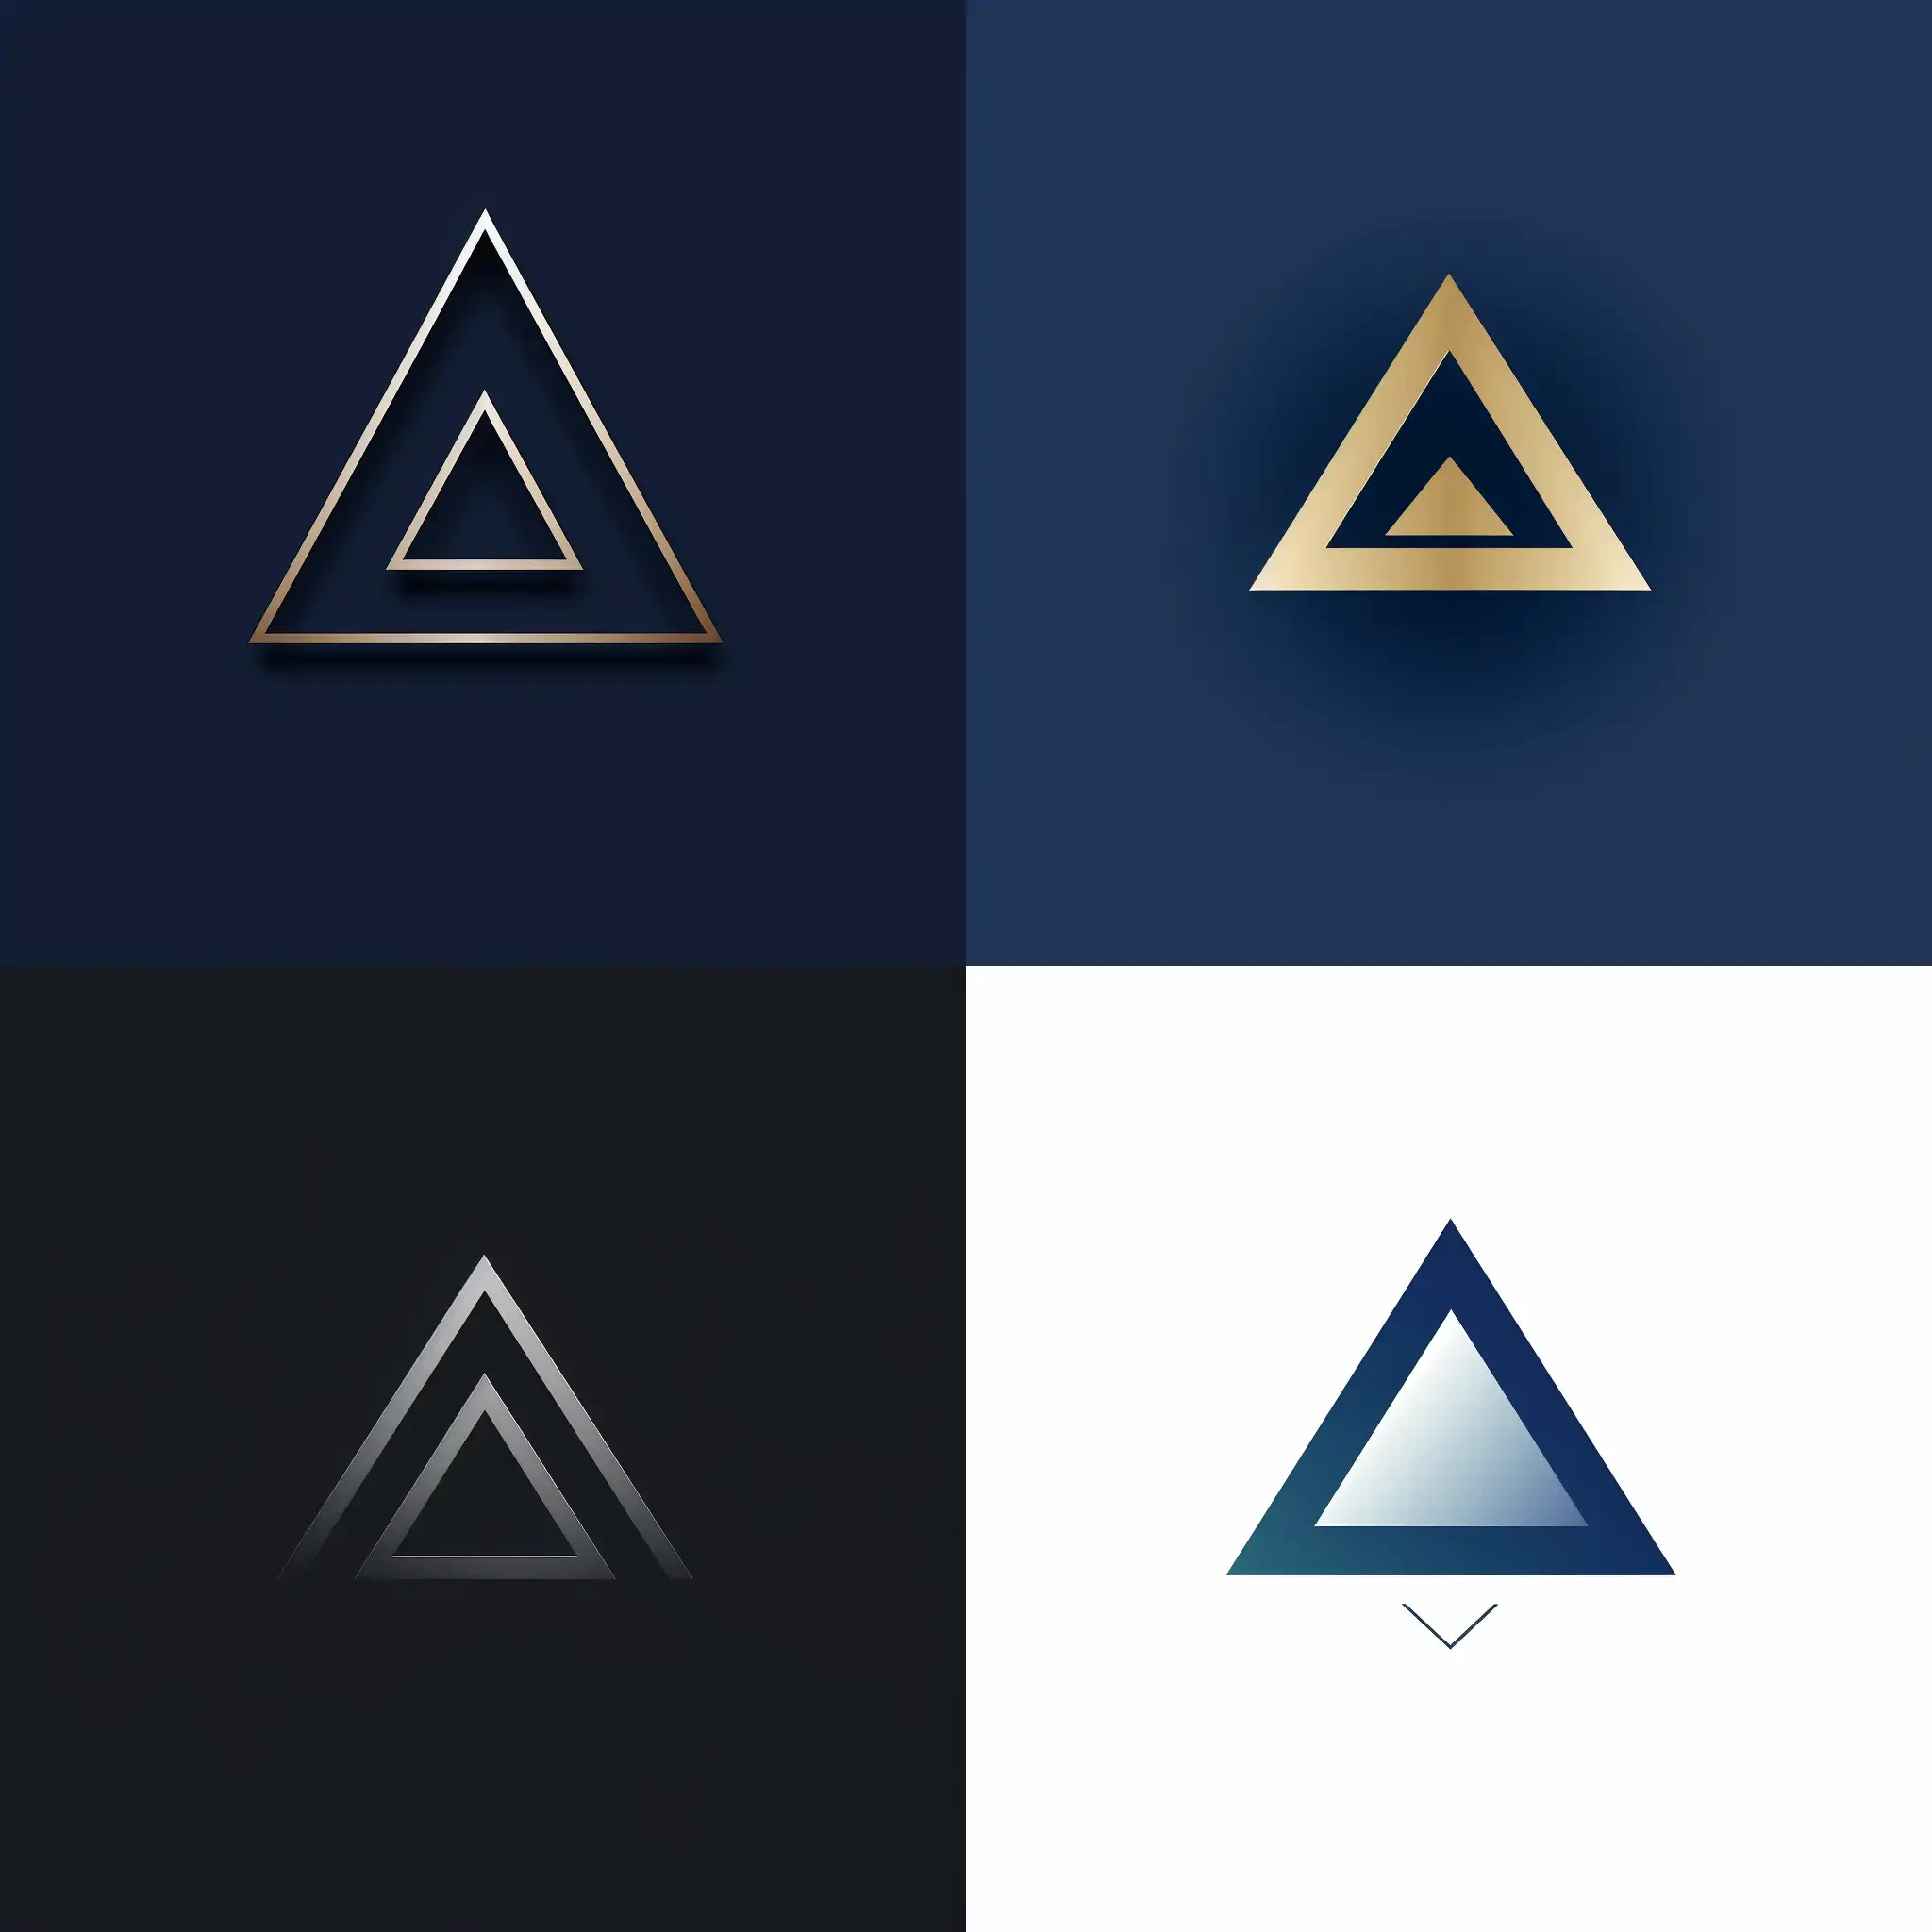 Blums-Logo-Transformation-with-Pyramid-and-Triangle-Aesthetics